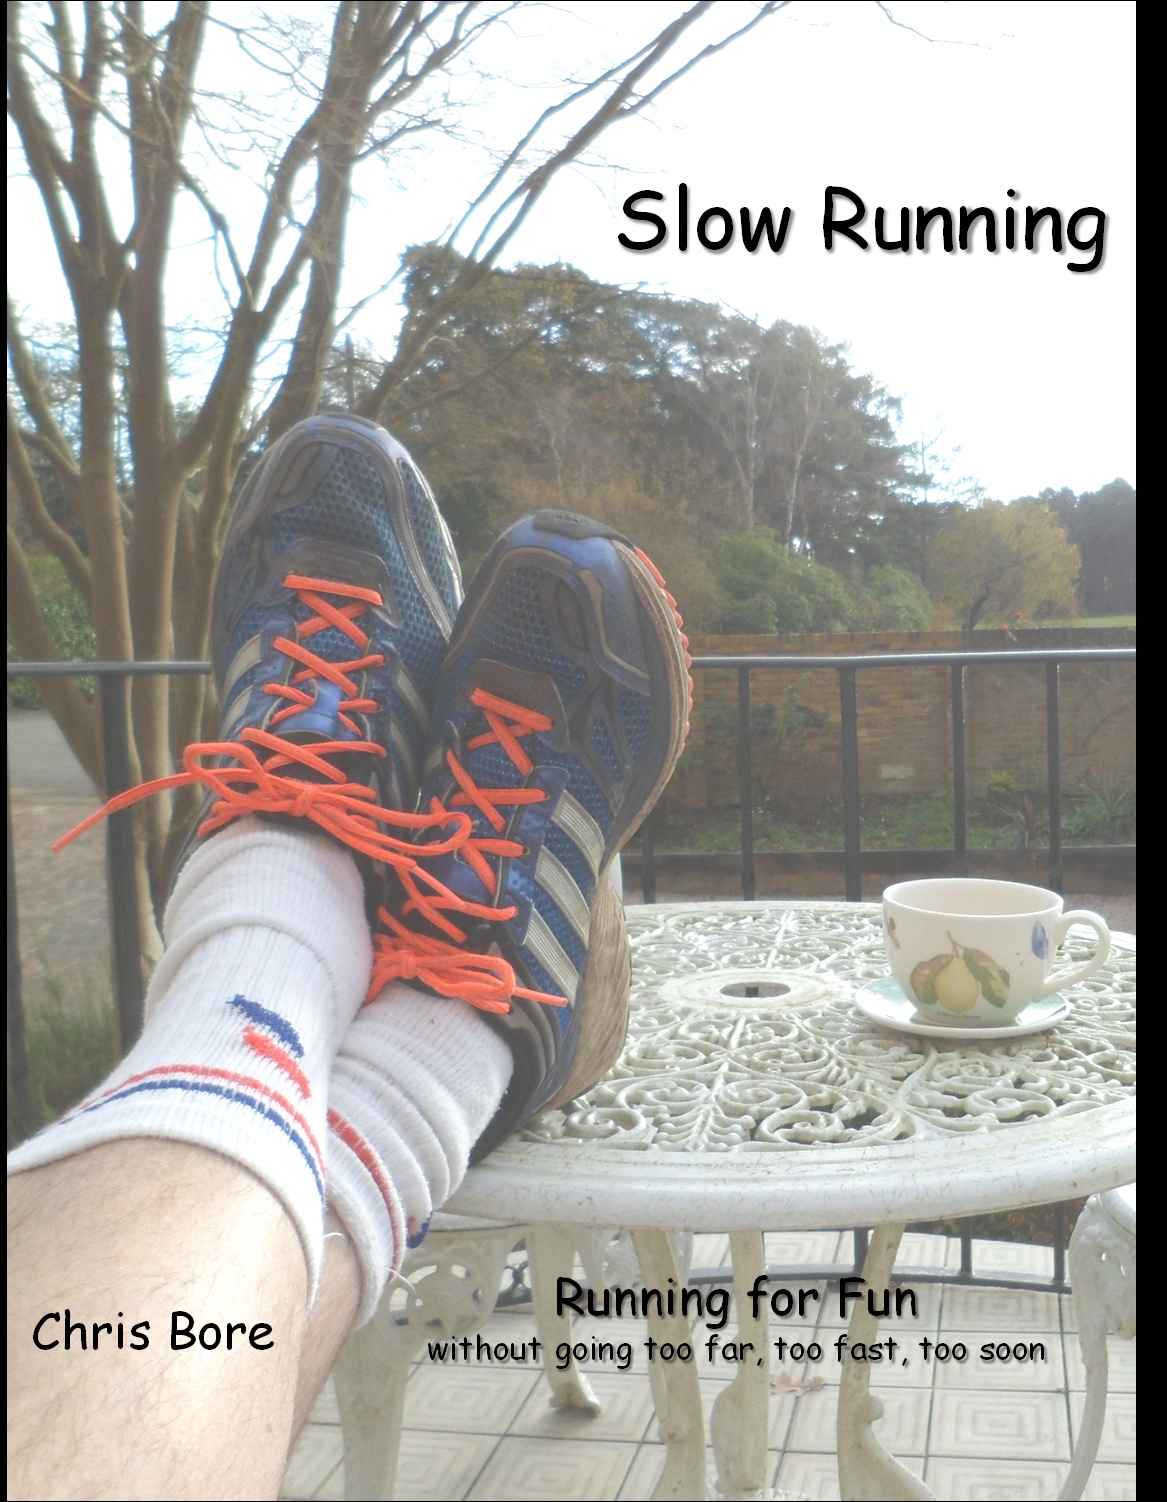 Some great books for slow jogging, slow running, and heart rate aerobic training